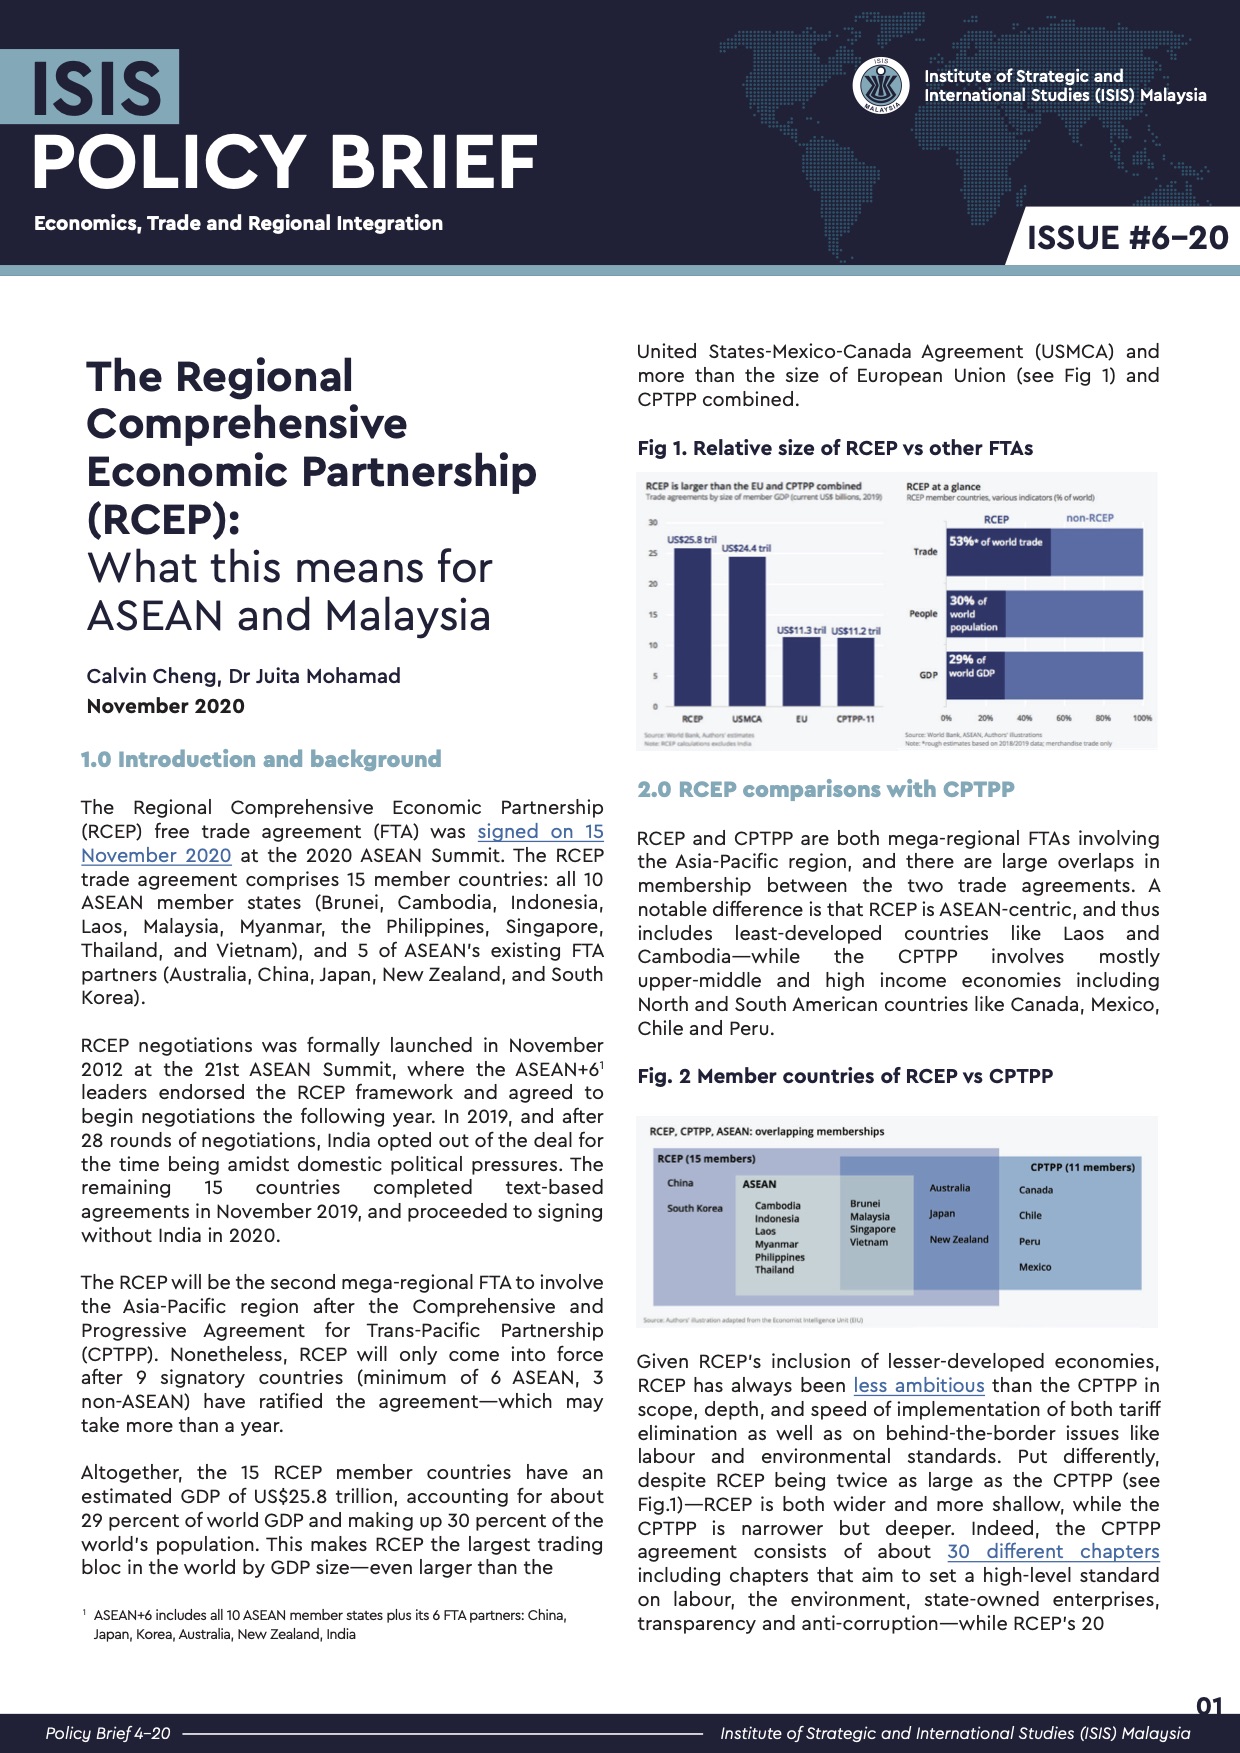 Trade agreements in Asia and the Pacific : bigger, deeper, digital